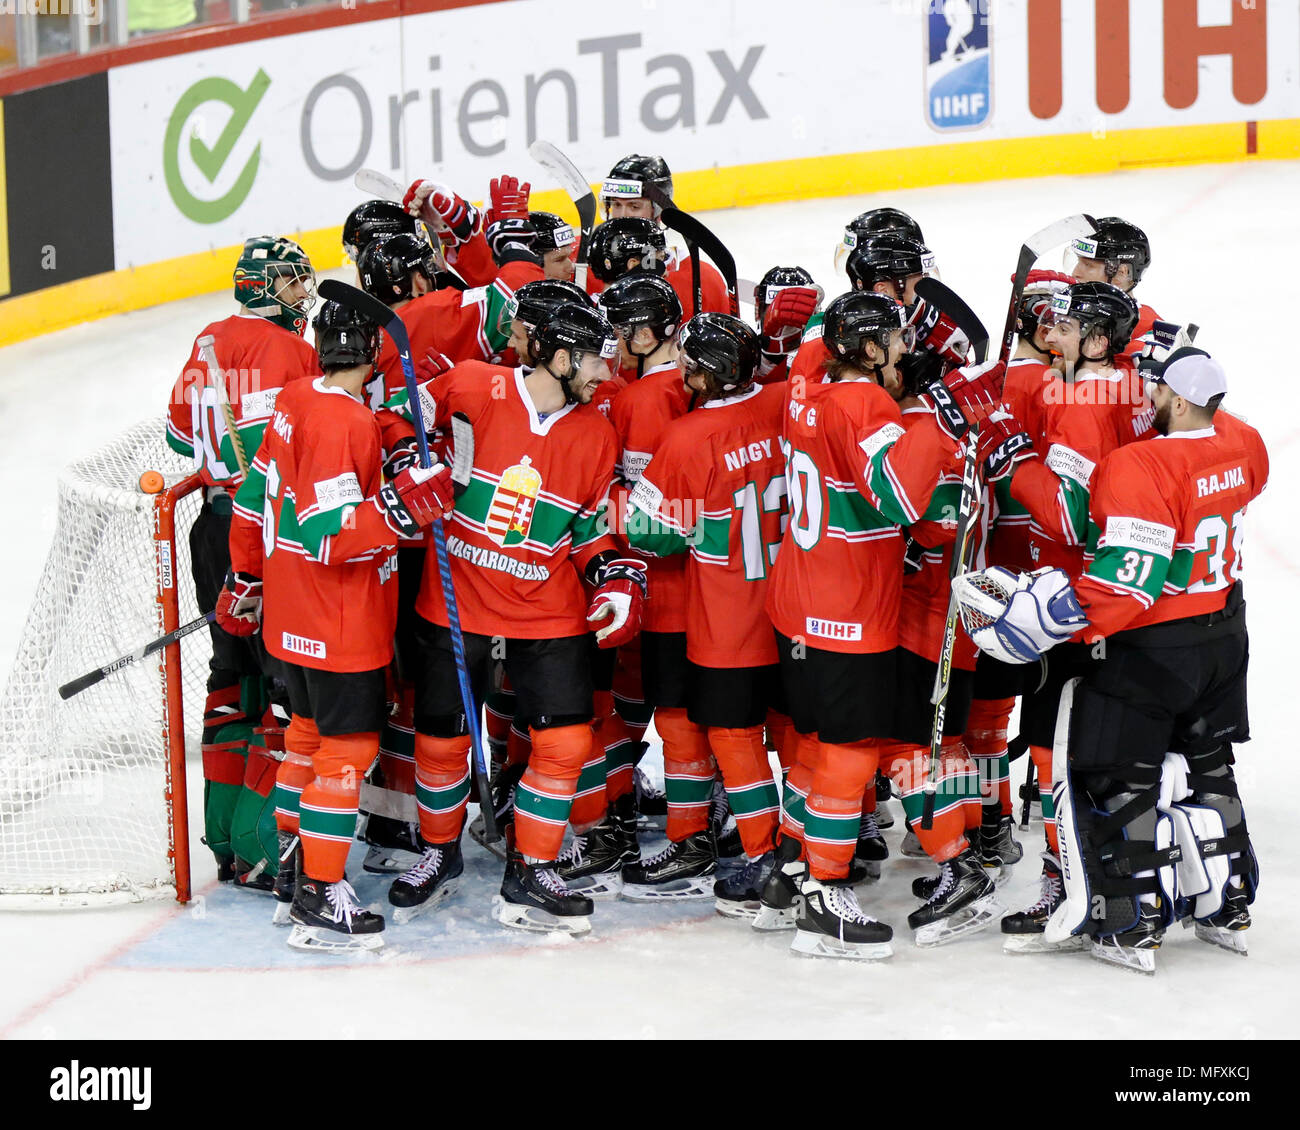 Budapest, Hungary. 26th April, 2018. Team of Hungary celebrates the victory over Poland during the 2018 IIHF Ice Hockey World Championship Division I Group A match between Poland and Hungary at Laszlo Papp Budapest Sports Arena on April 26, 2018 in Budapest, Hungary. Credit: Laszlo Szirtesi/Alamy Live News Stock Photo